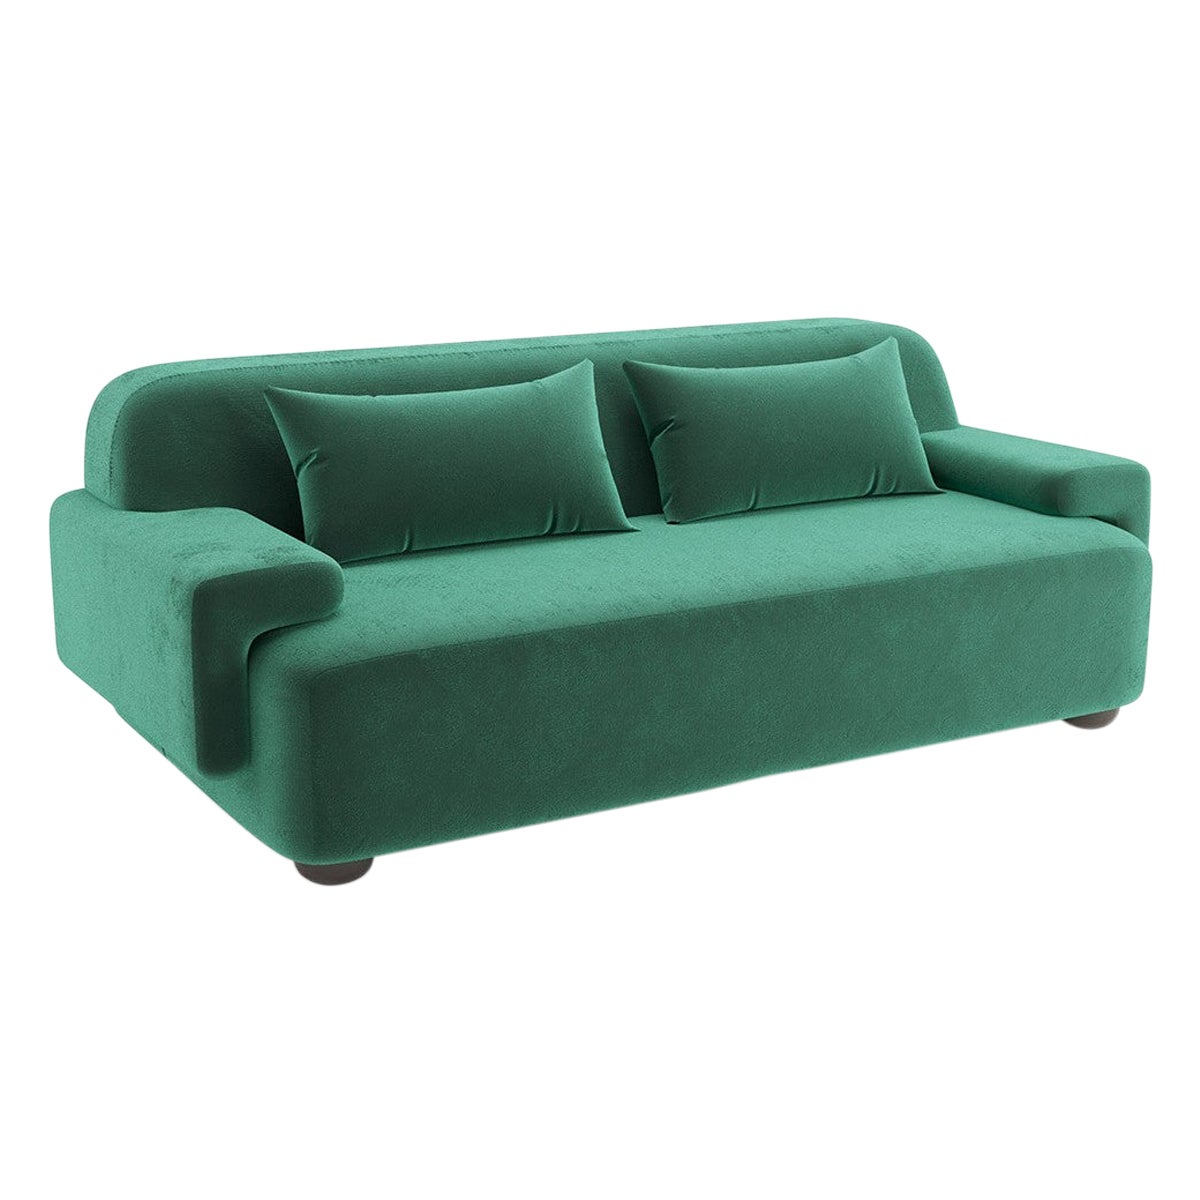 Popus Editions Lena 2.5 Seater Sofa in Green '772256' Como Velvet Upholstery For Sale